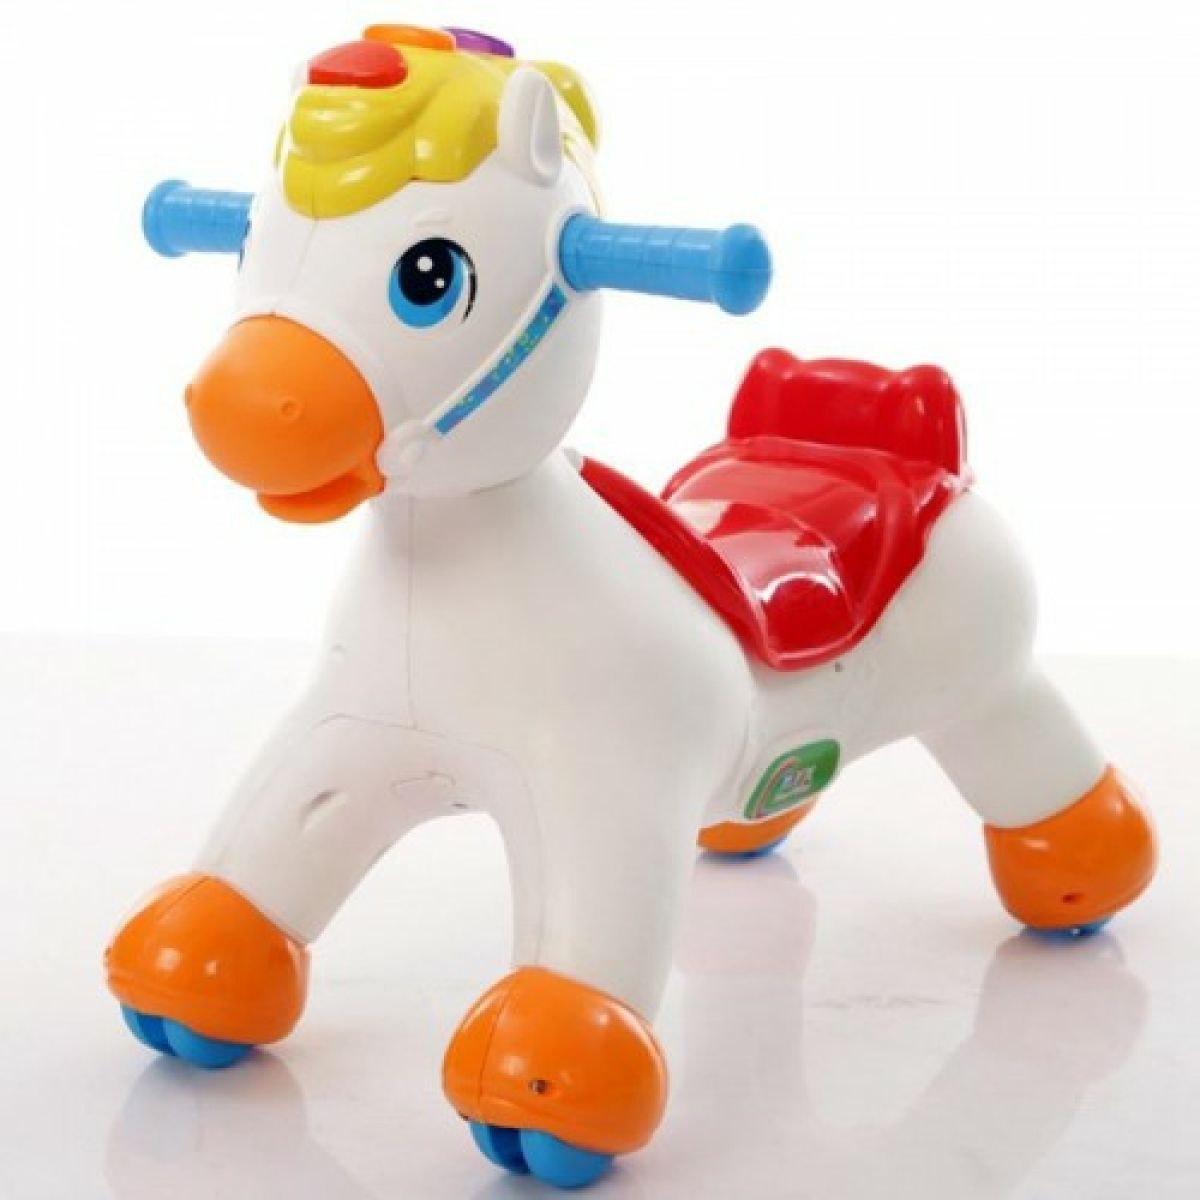 Kids Rocking Horse,Baby Horse Swing,Children Riding Toy Pony,Horse With Lights and Different Music